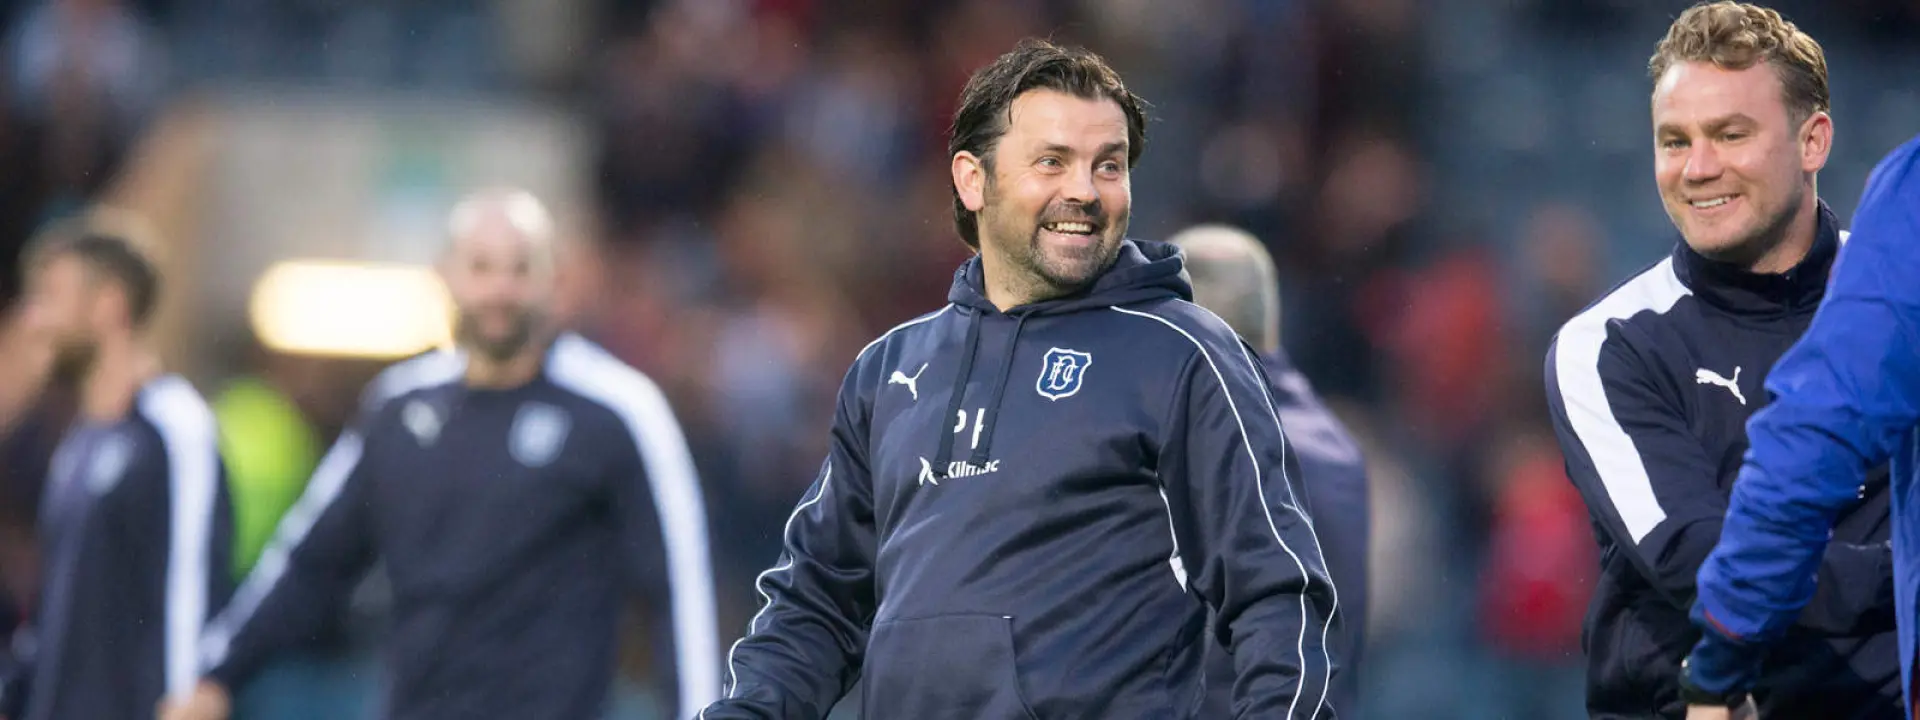 Paul Hartley at pitchside for a Dundee friendly